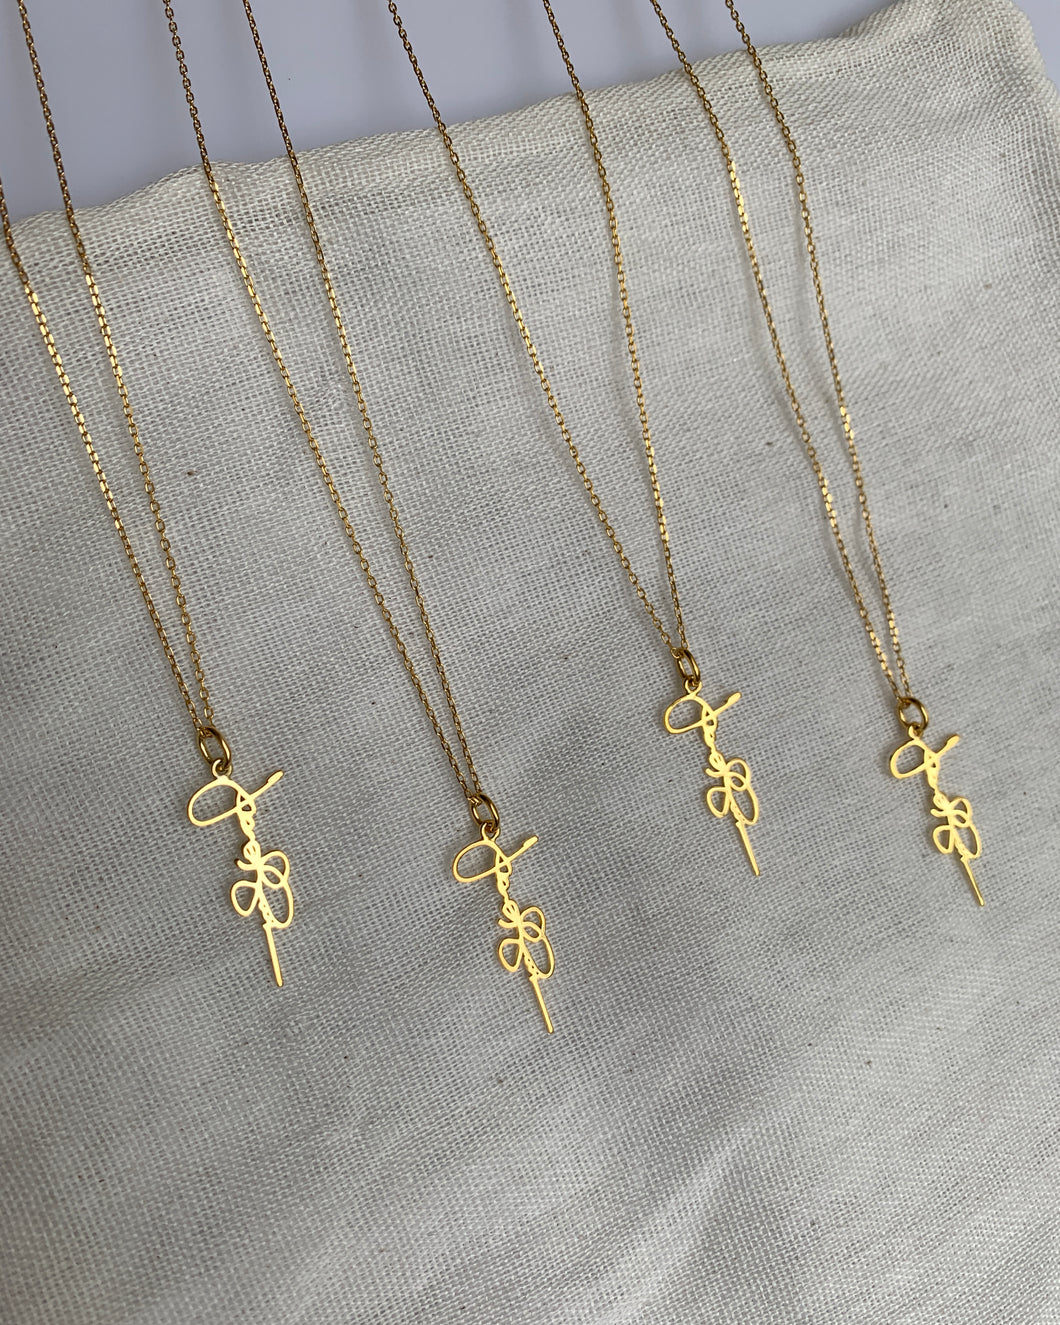 A vertical signature necklace inspired by our client's dad. Set in 14k yellow gold.